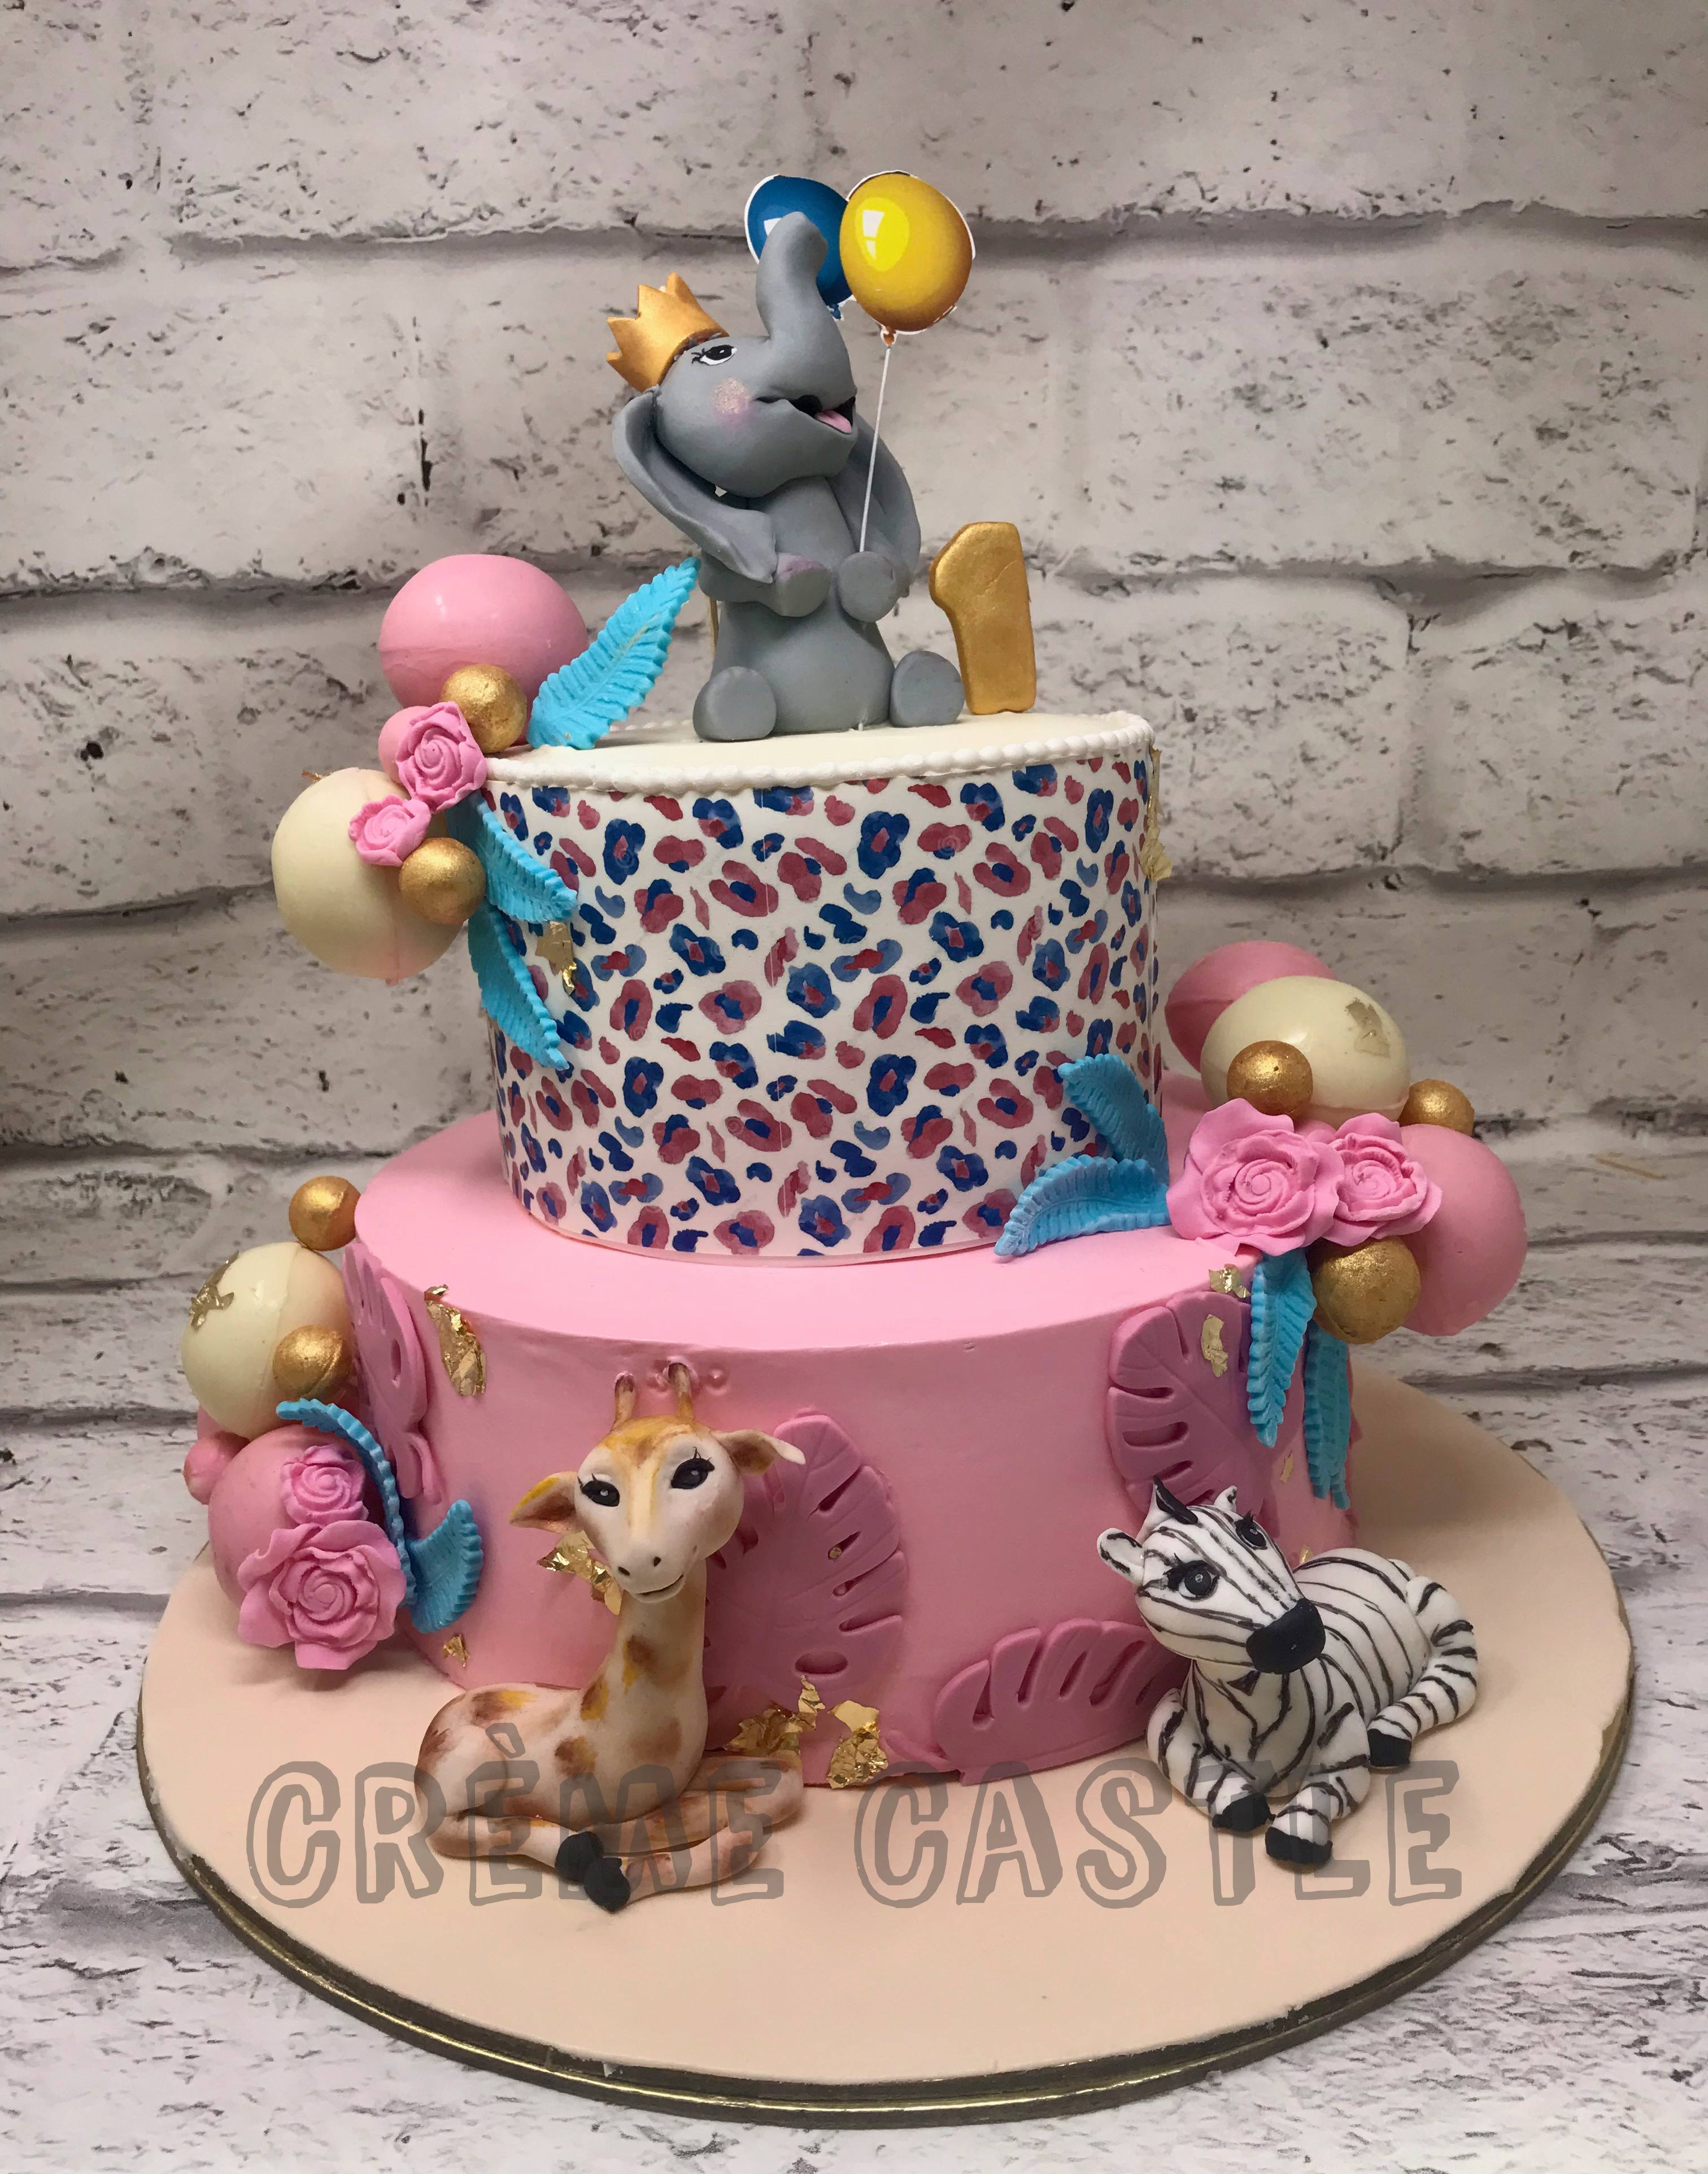 Carnival of Mice | Carnival cakes, Carnival themed cakes, Circus theme cakes